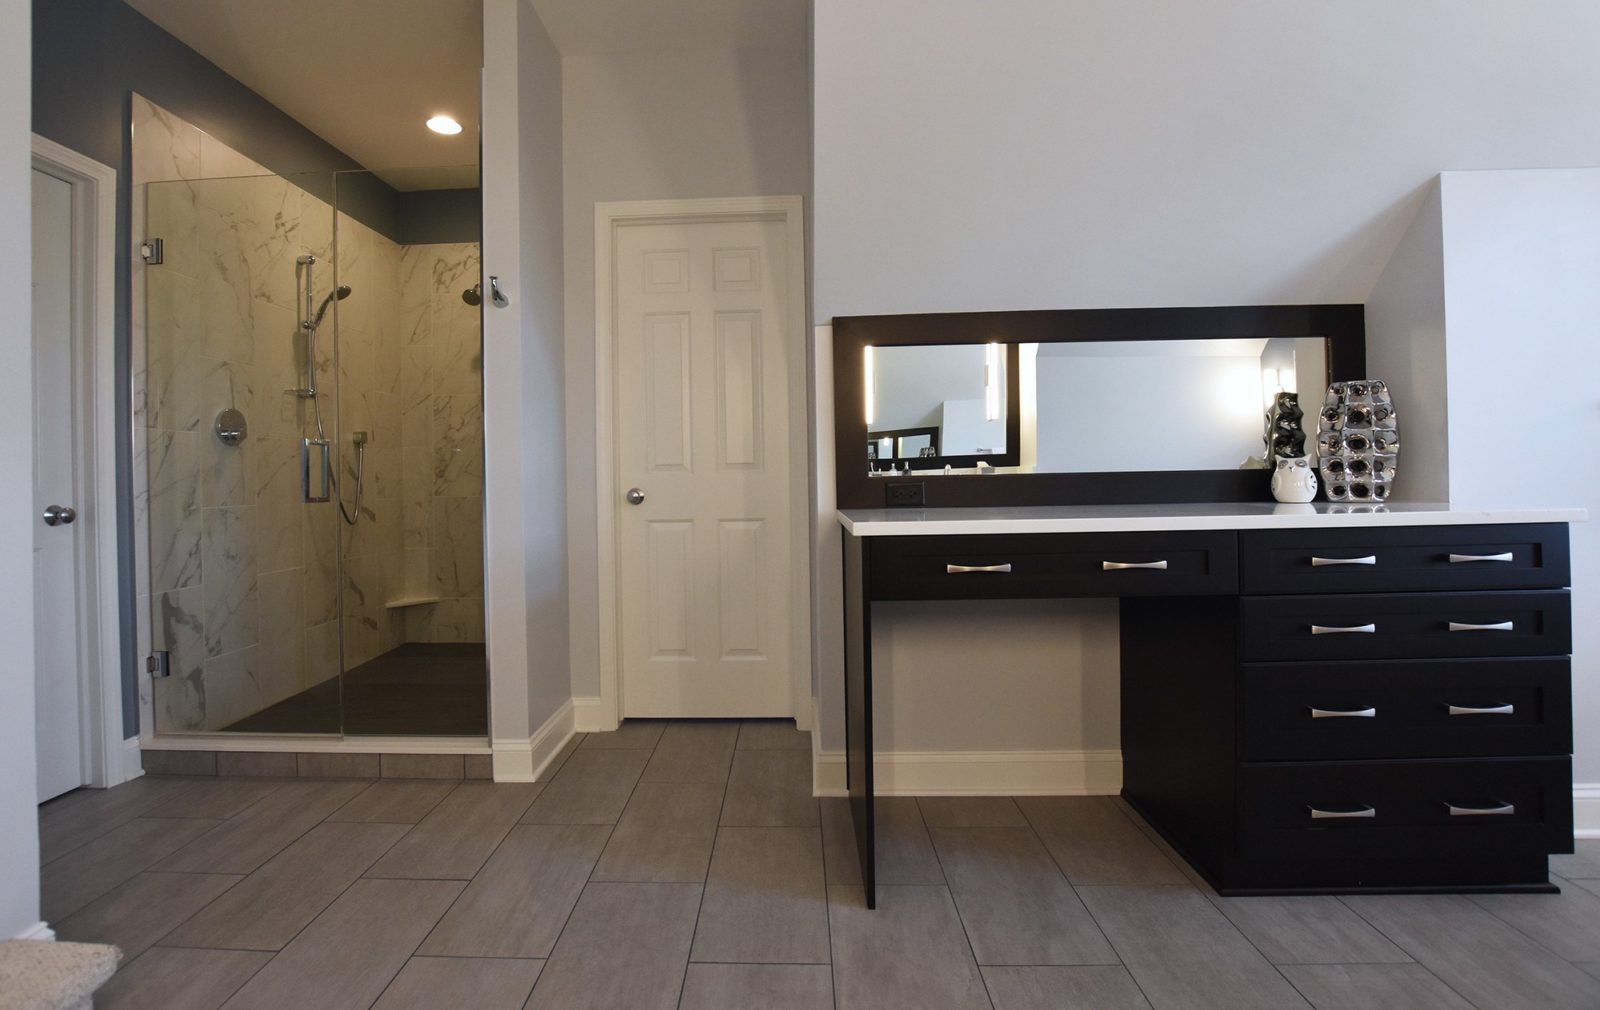 Bathroom with a countertop along one wall and walled-in shower in a corner